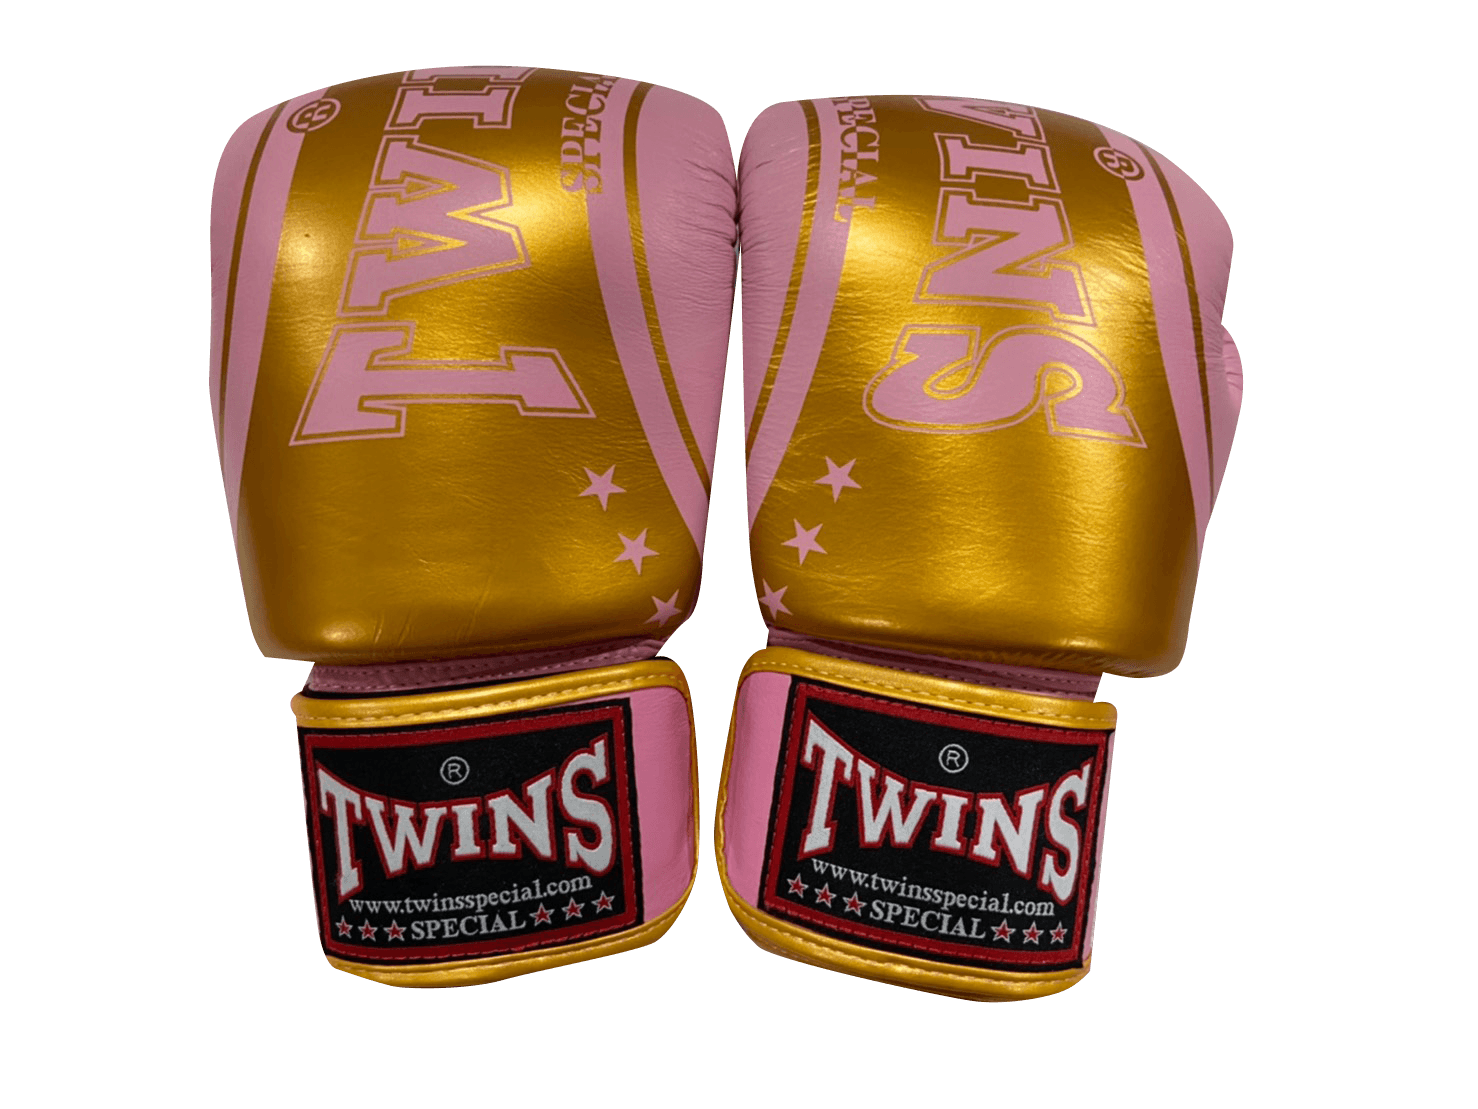 Twins Special BOXING GLOVES FBGVL3-TW4 Pink Gold